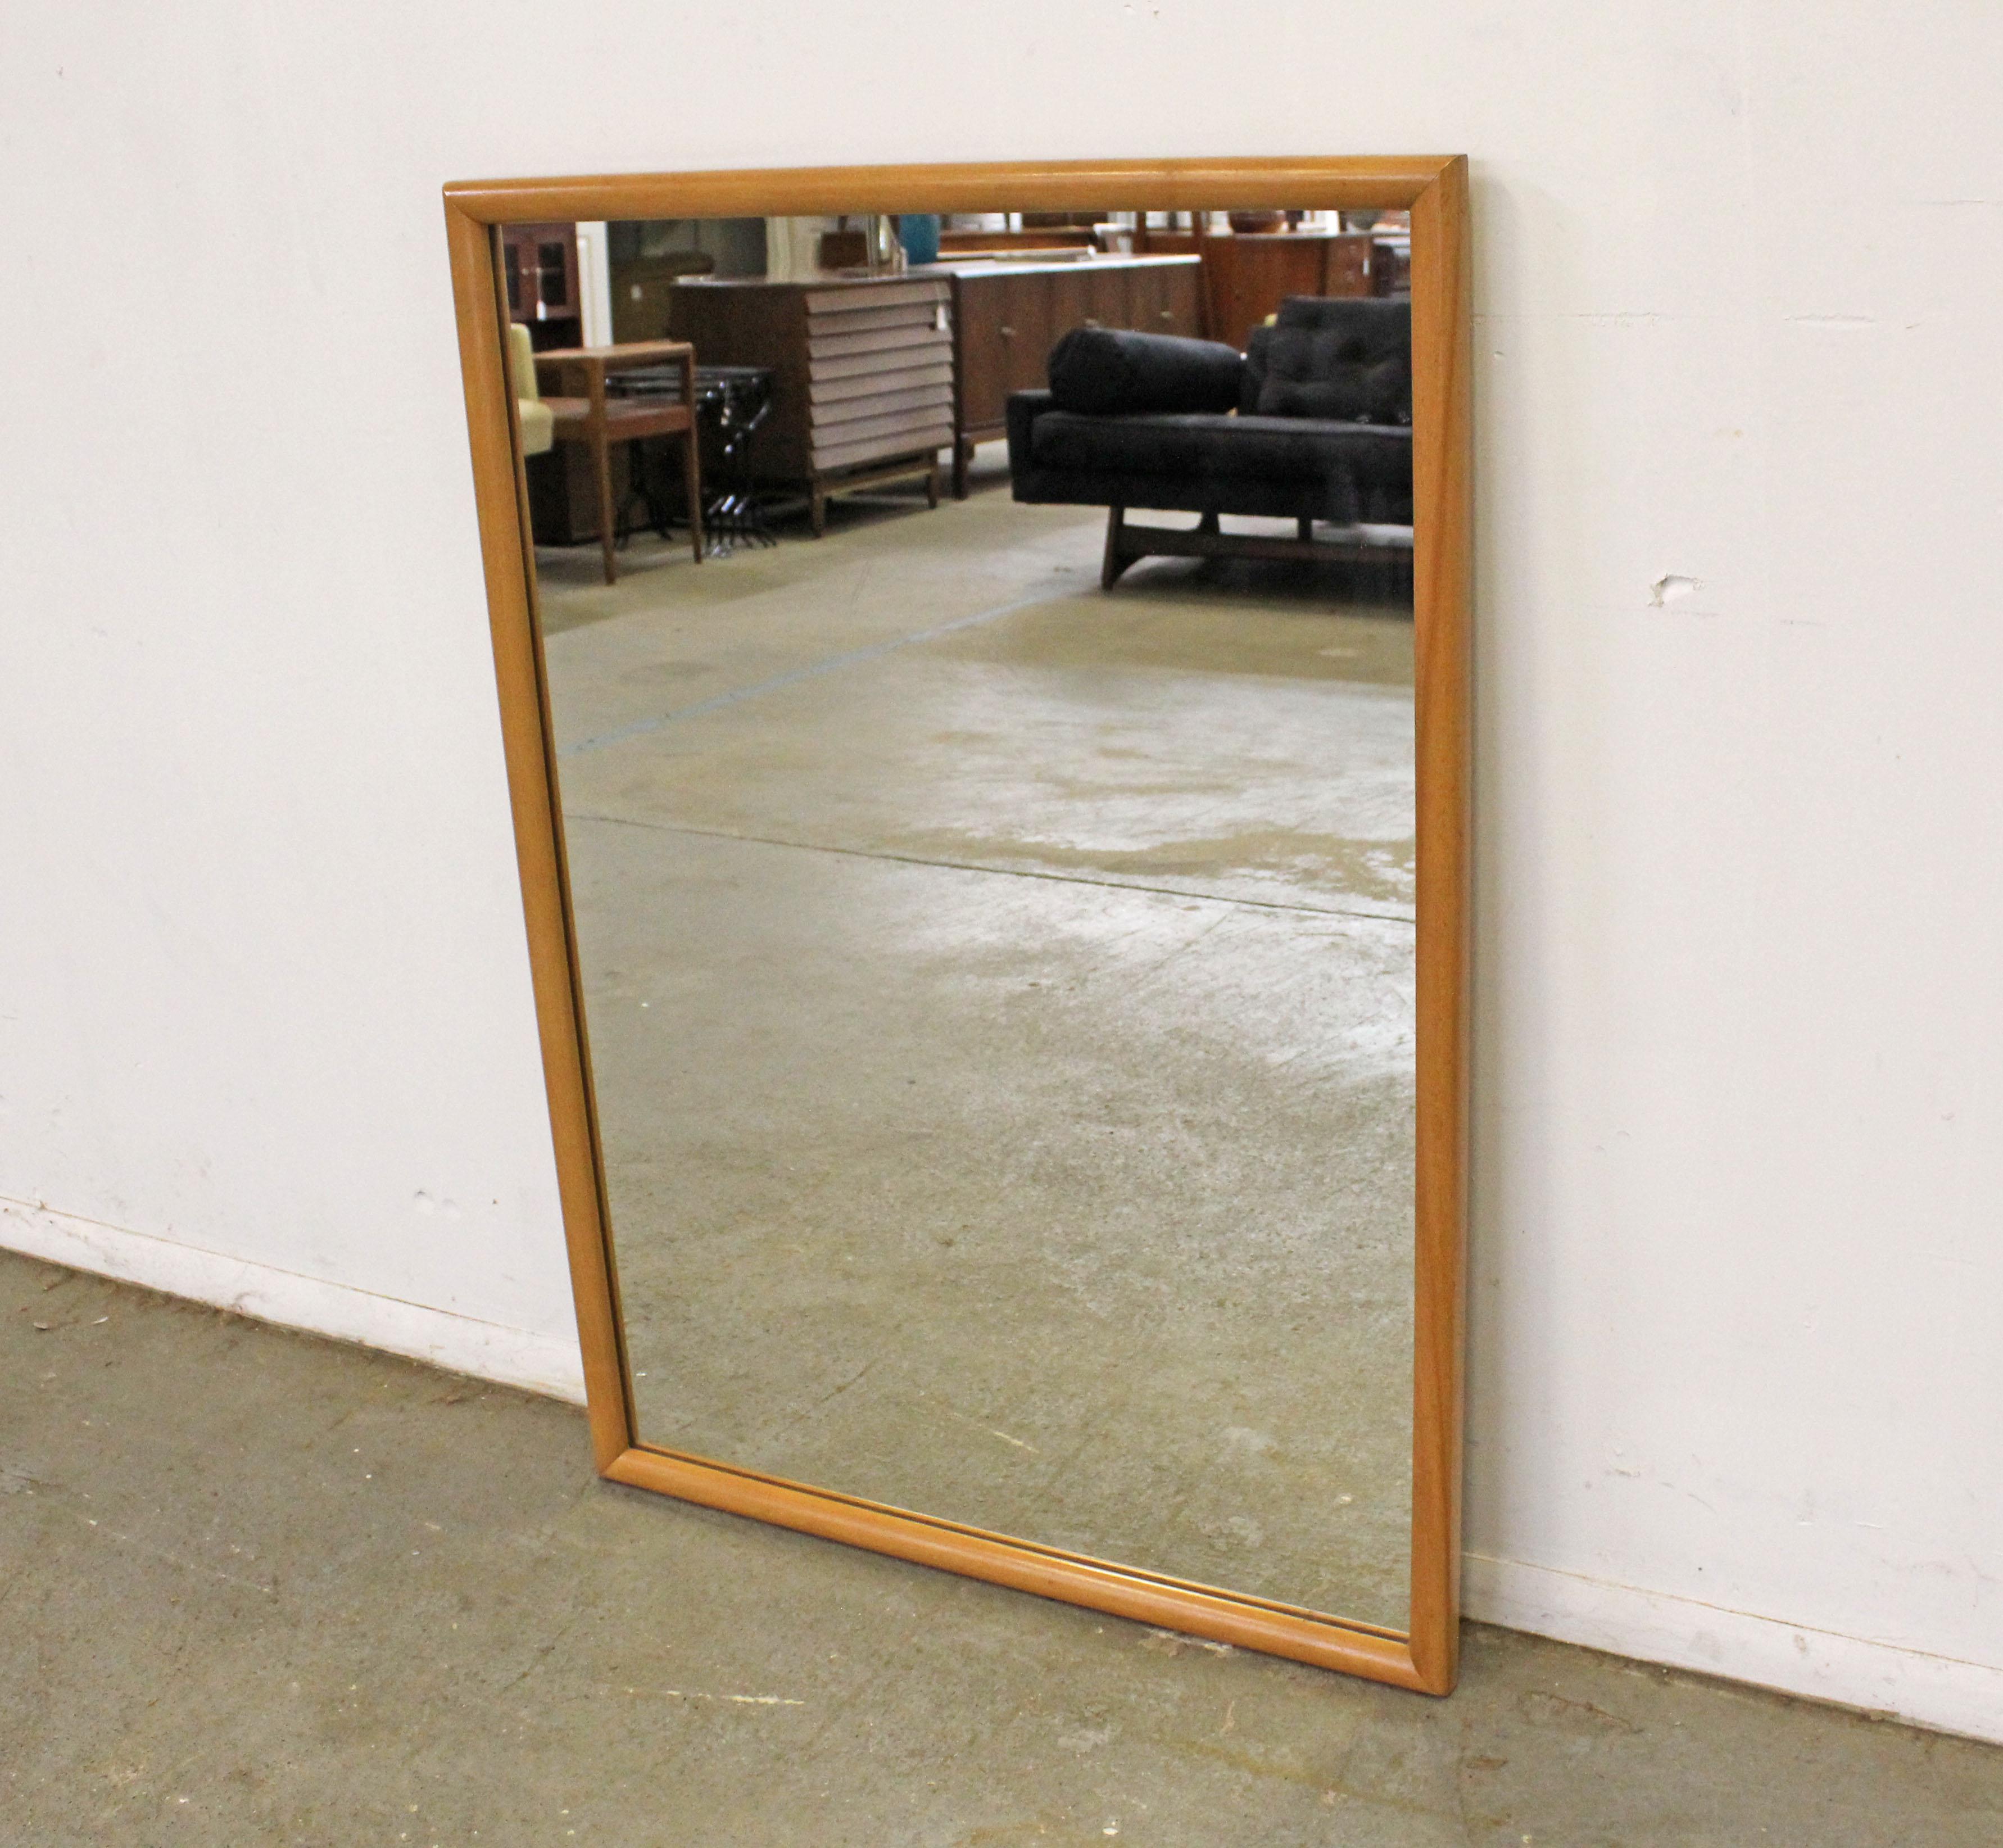 Mid-Century Modern Heywood Wakefield champagne mirror

Offered is a vintage Mid-Century Modern mirror by Heywood Wakefield. It has a wood frame with a Champagne finish. It is in good condition for its age, shows some age wear and surface scratches